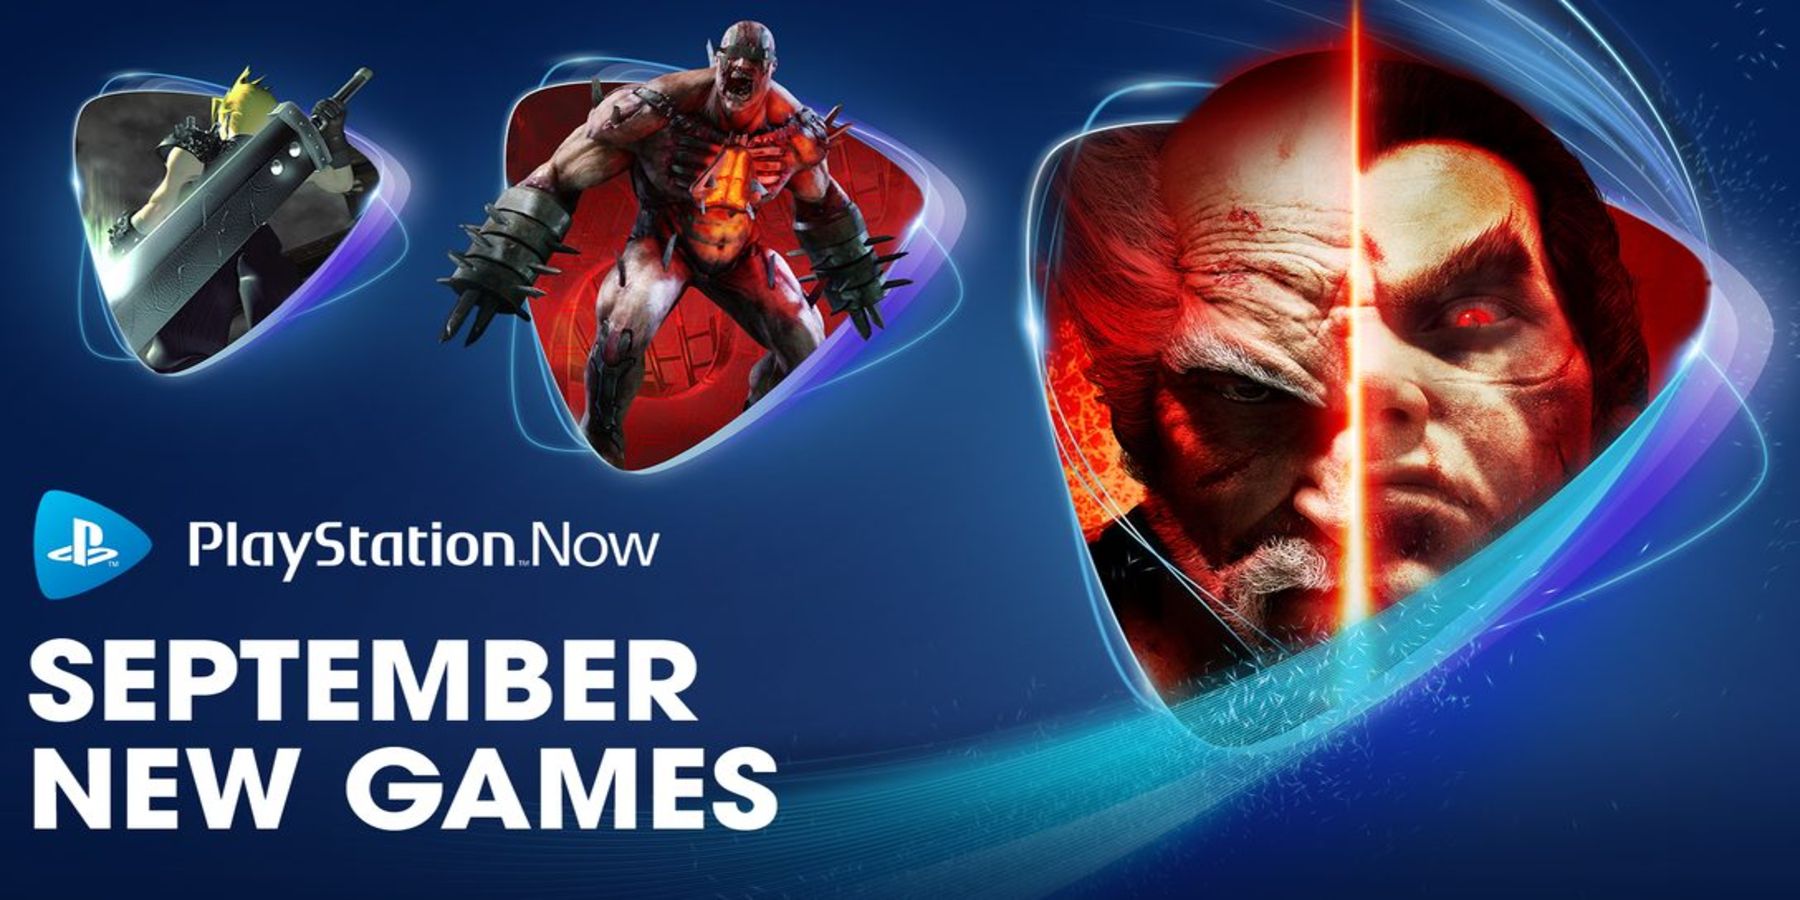 PlayStation Now September 2021